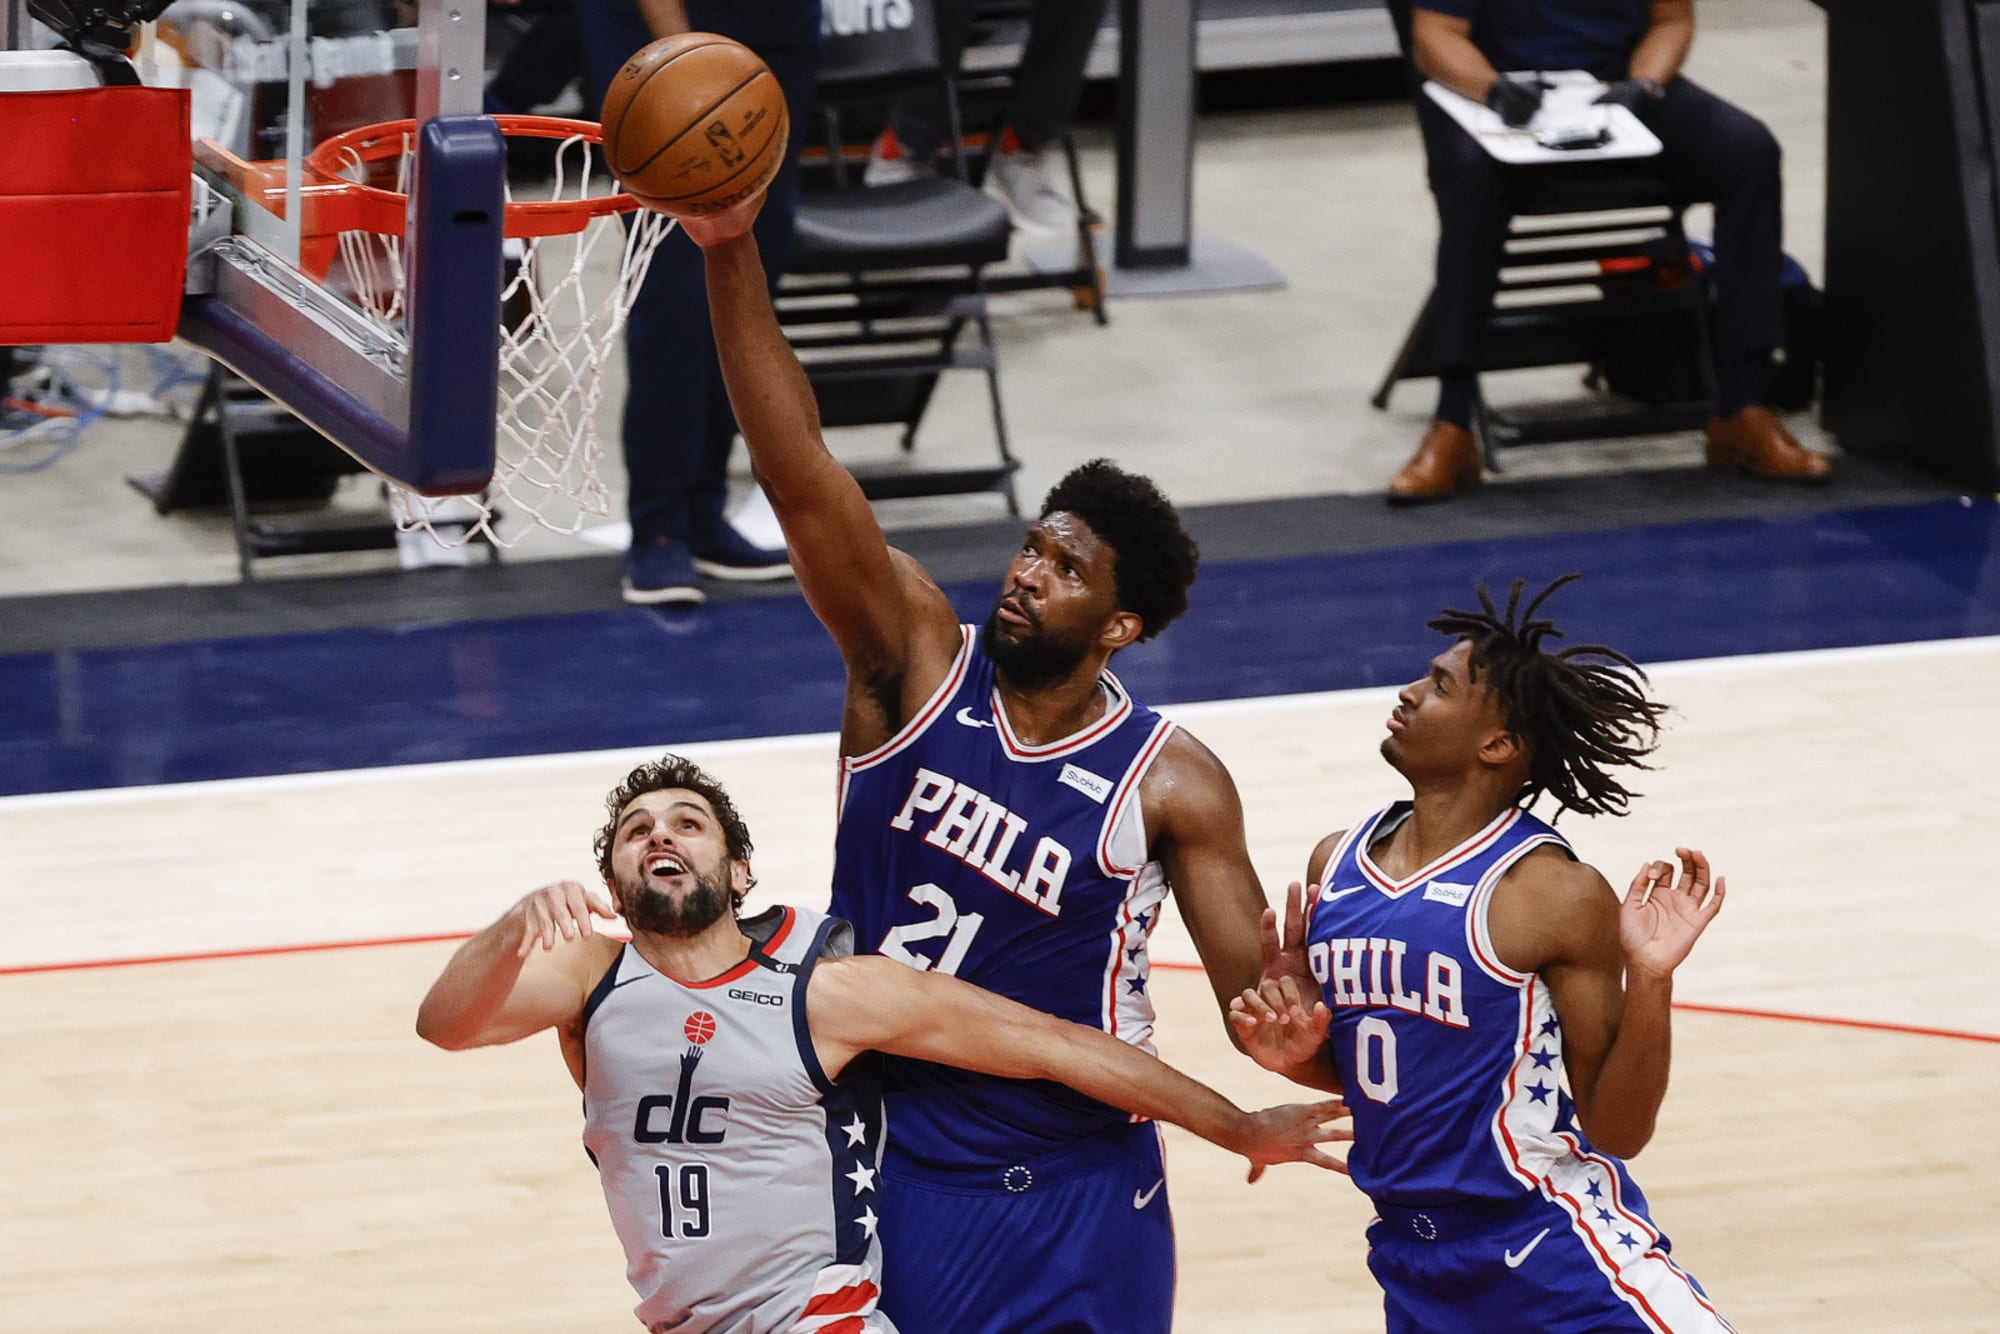 Potential of the Sixers' duo of Joel Embiid and Tyrese Maxey